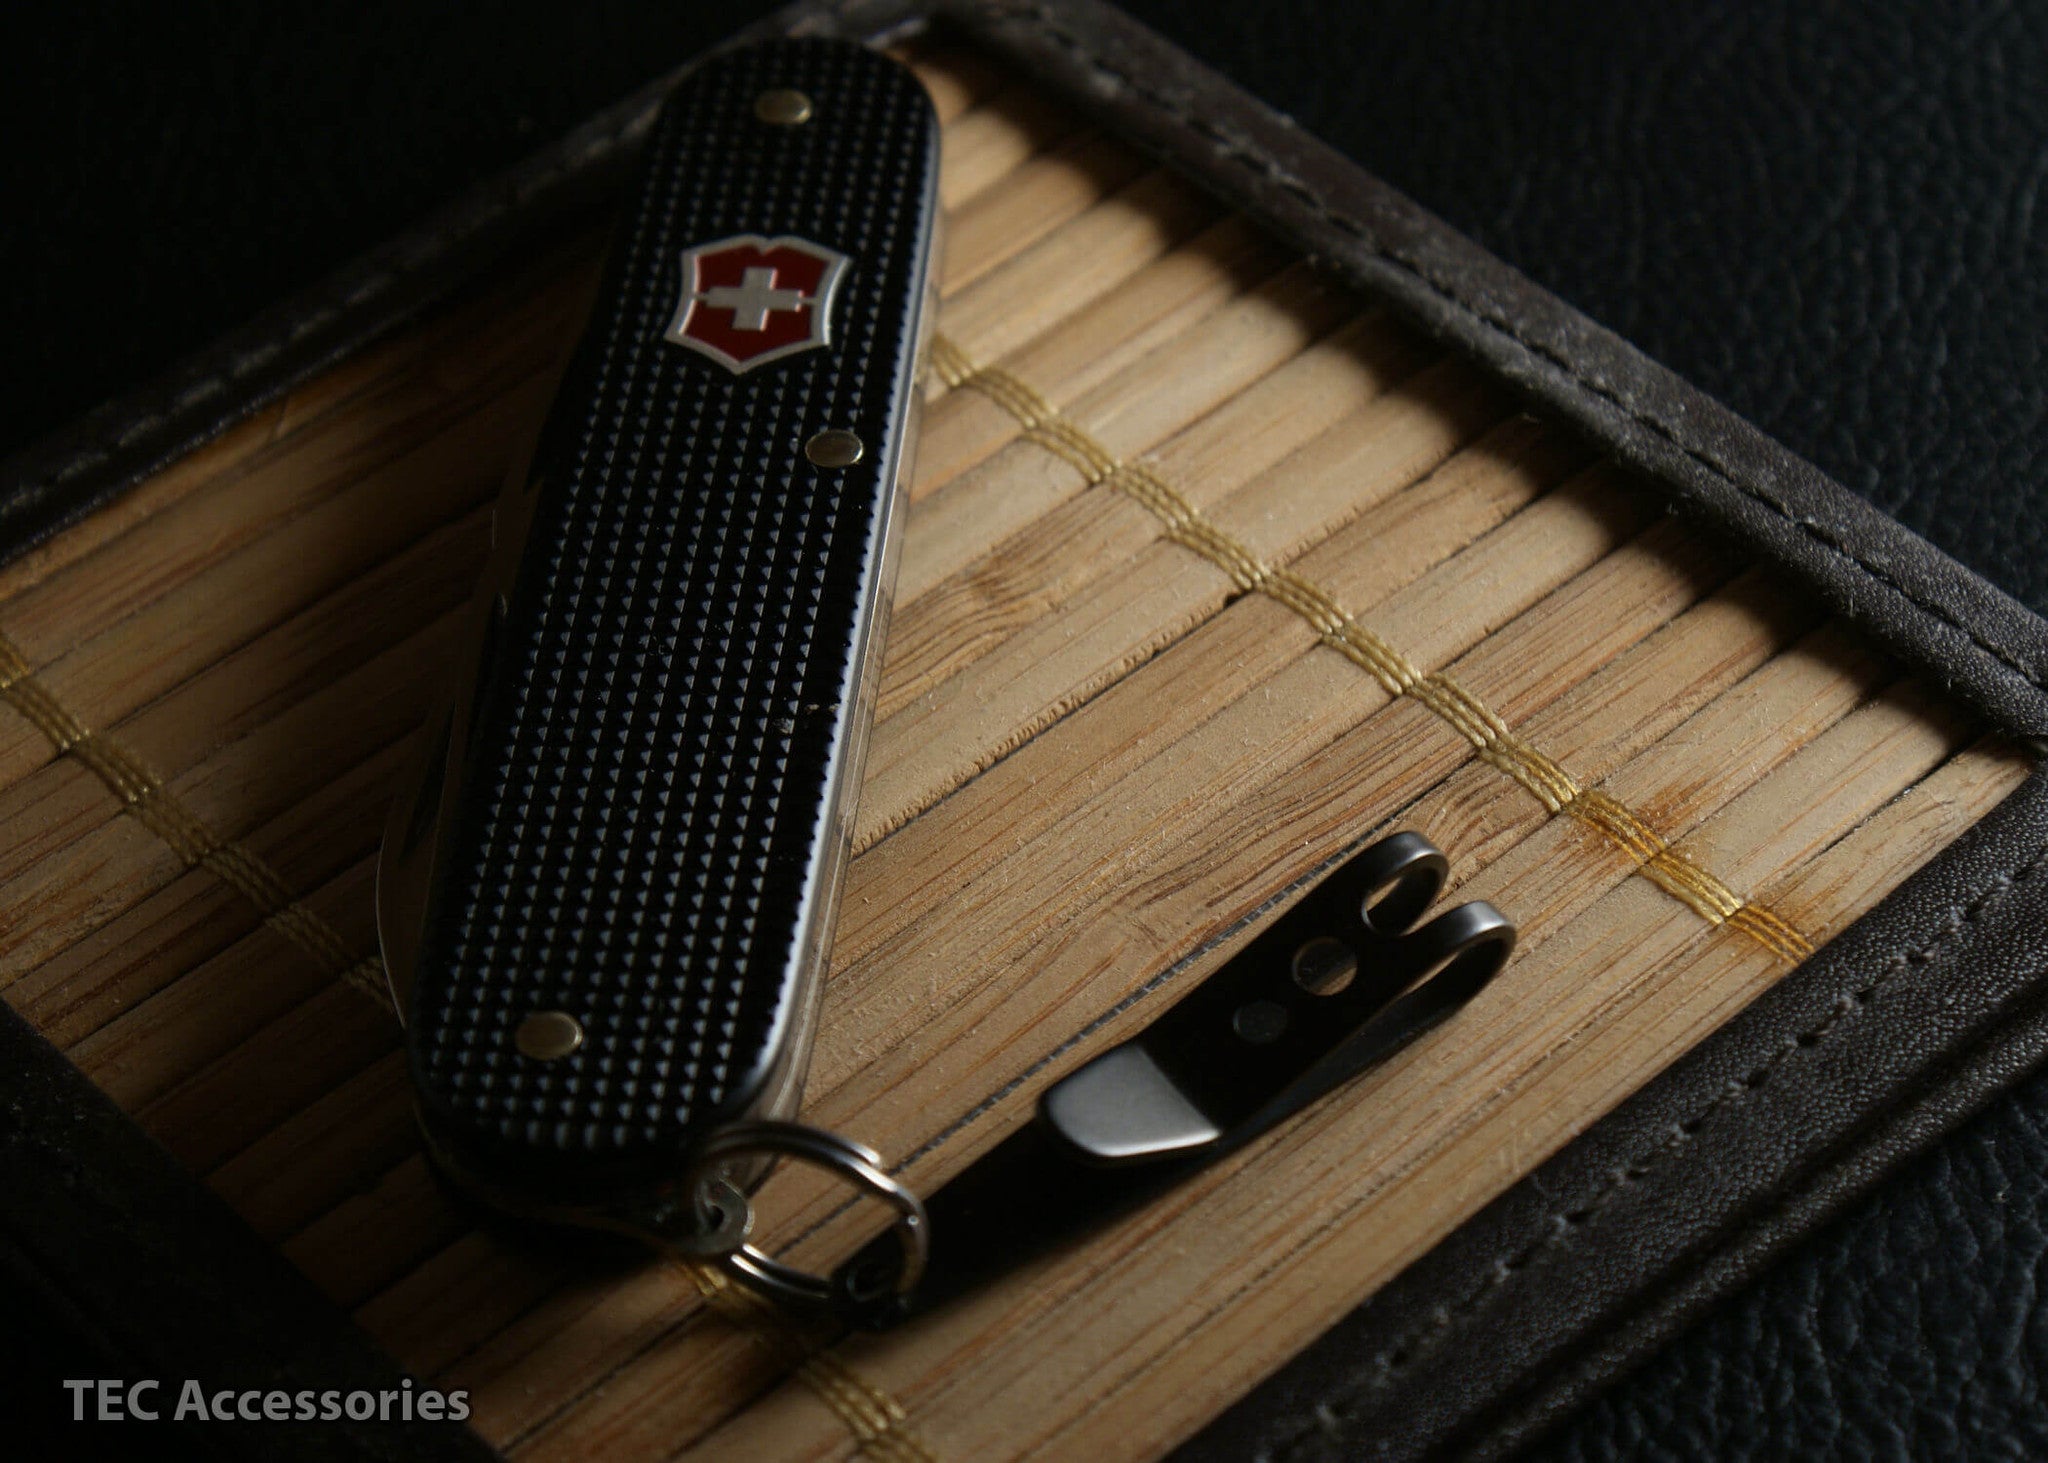 Black Diamond Coating Suspension Clip and Swiss Army Knife